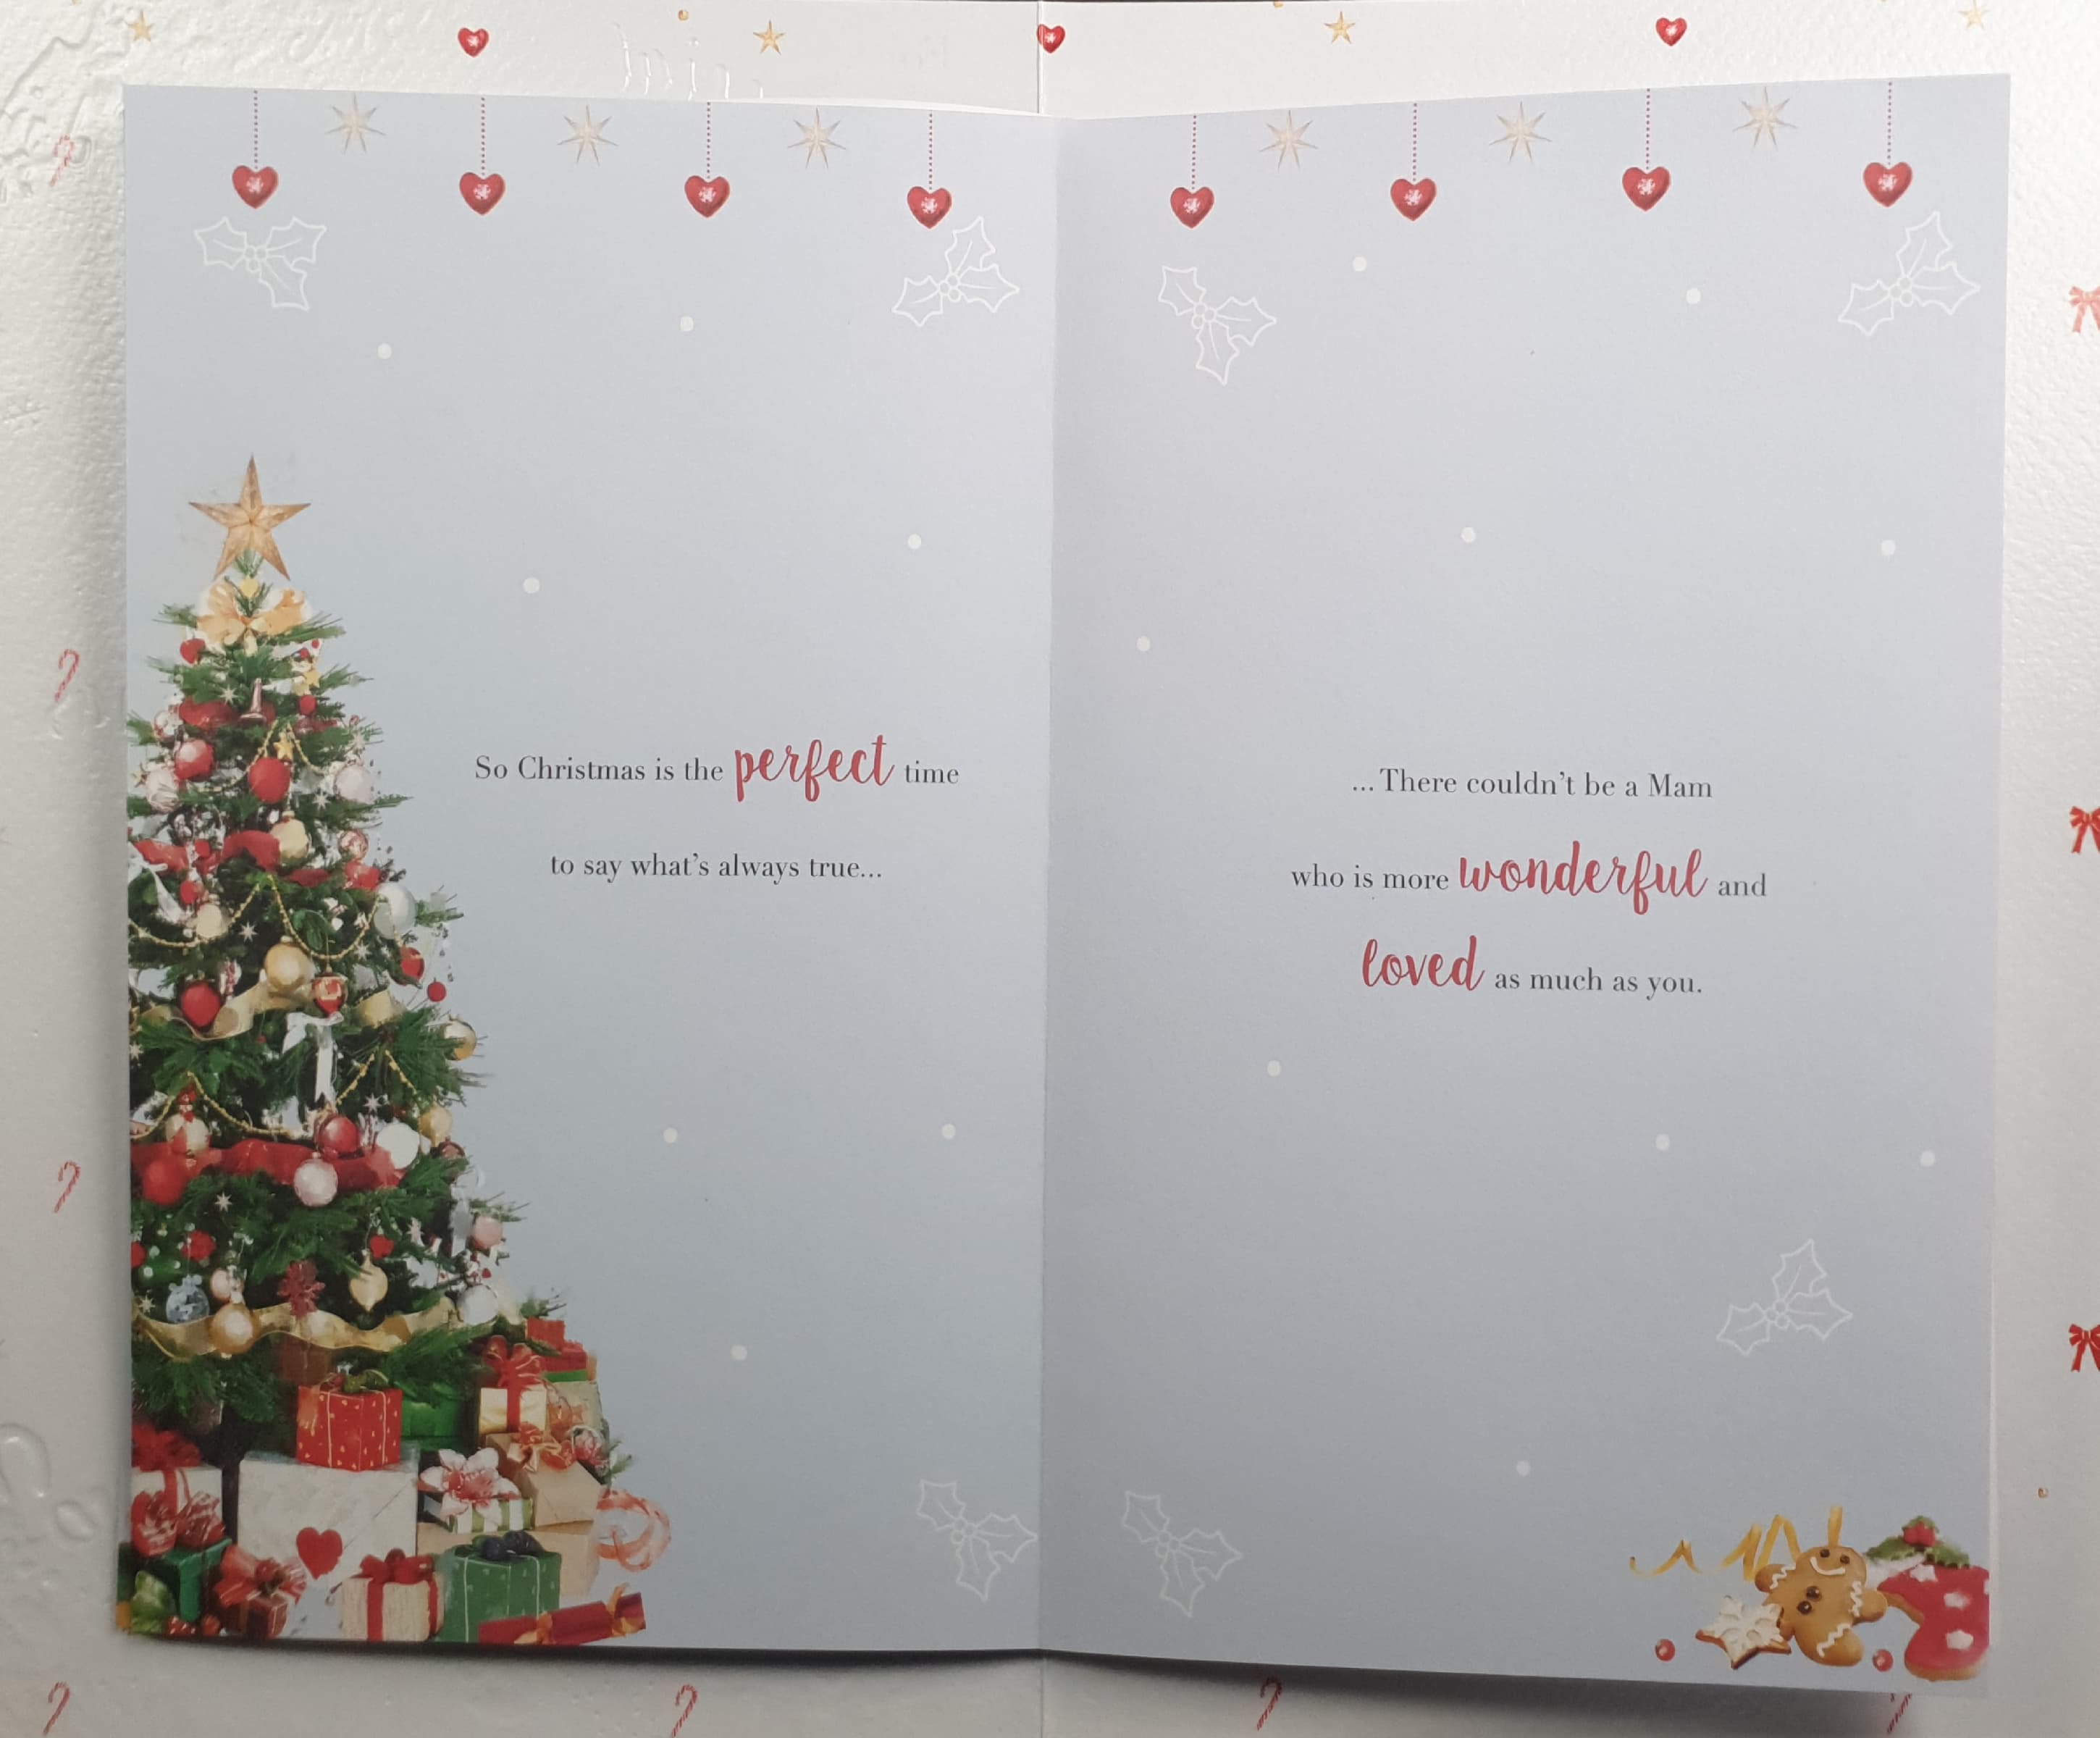 Mam Christmas Card - Christmas Tree & Gifts on Pink Background